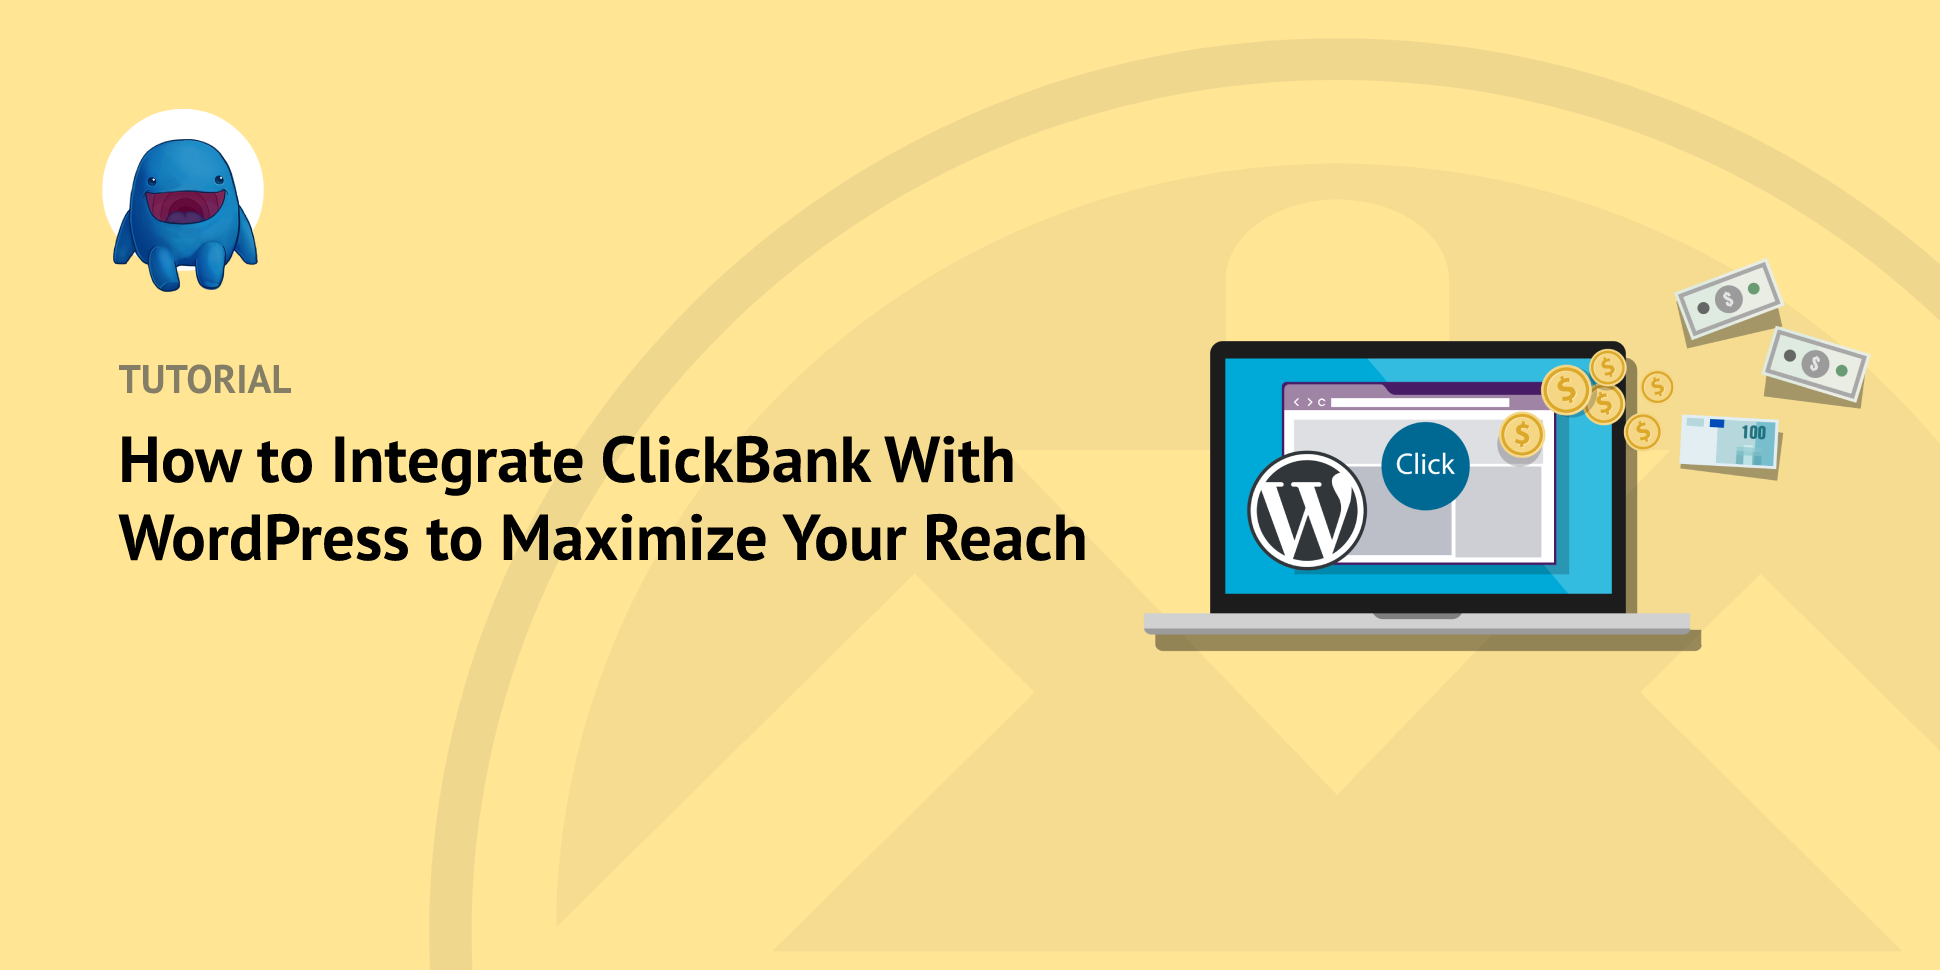 How to Integrate ClickBank With WordPress (Step By Step)